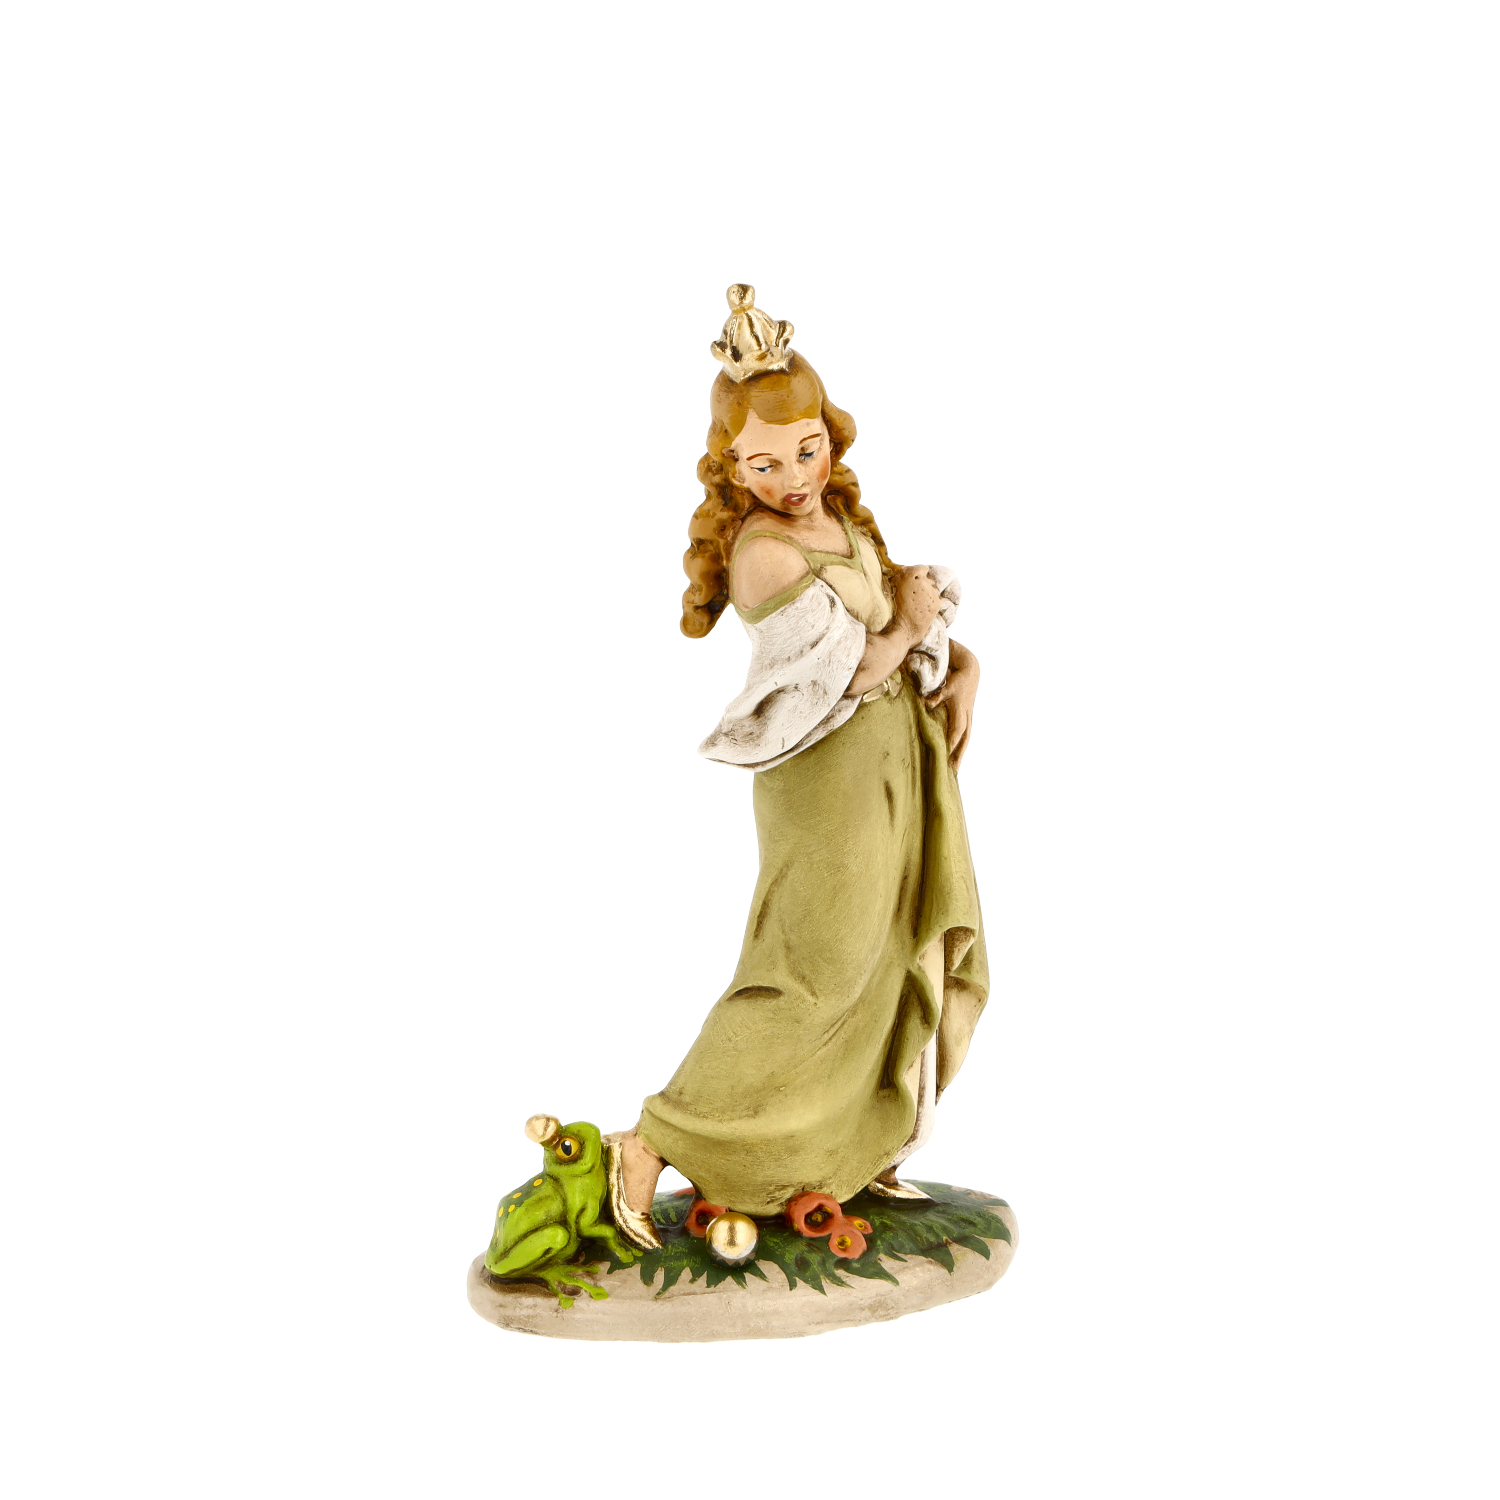 Princess and frog from "Frog King" fairy tale figure, H =  5 3/4 inch